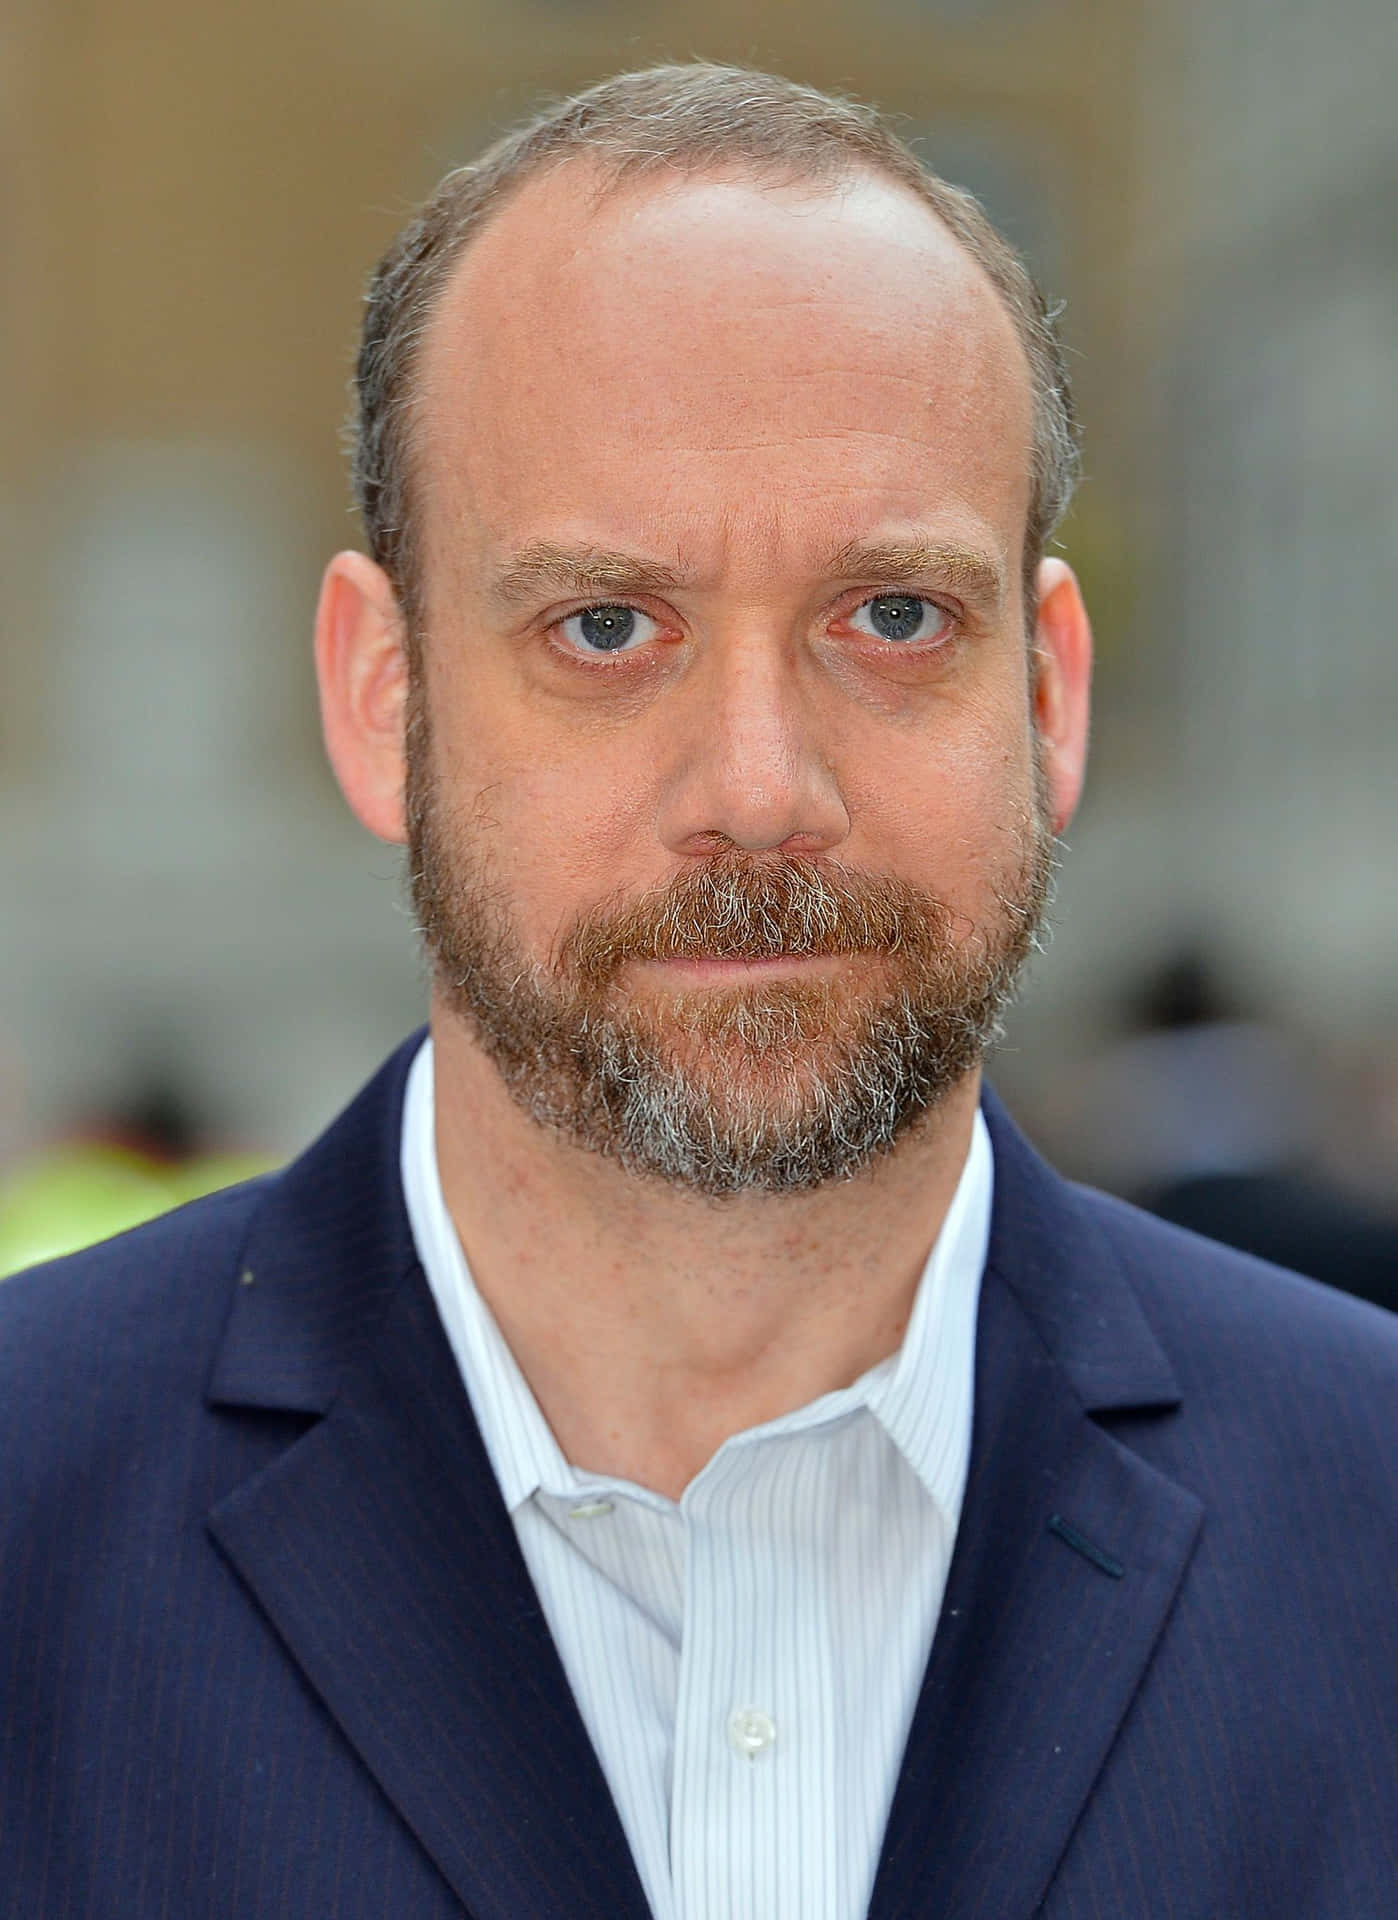 Accomplished Actor Paul Giamatti In Thoughtful Moment Wallpaper